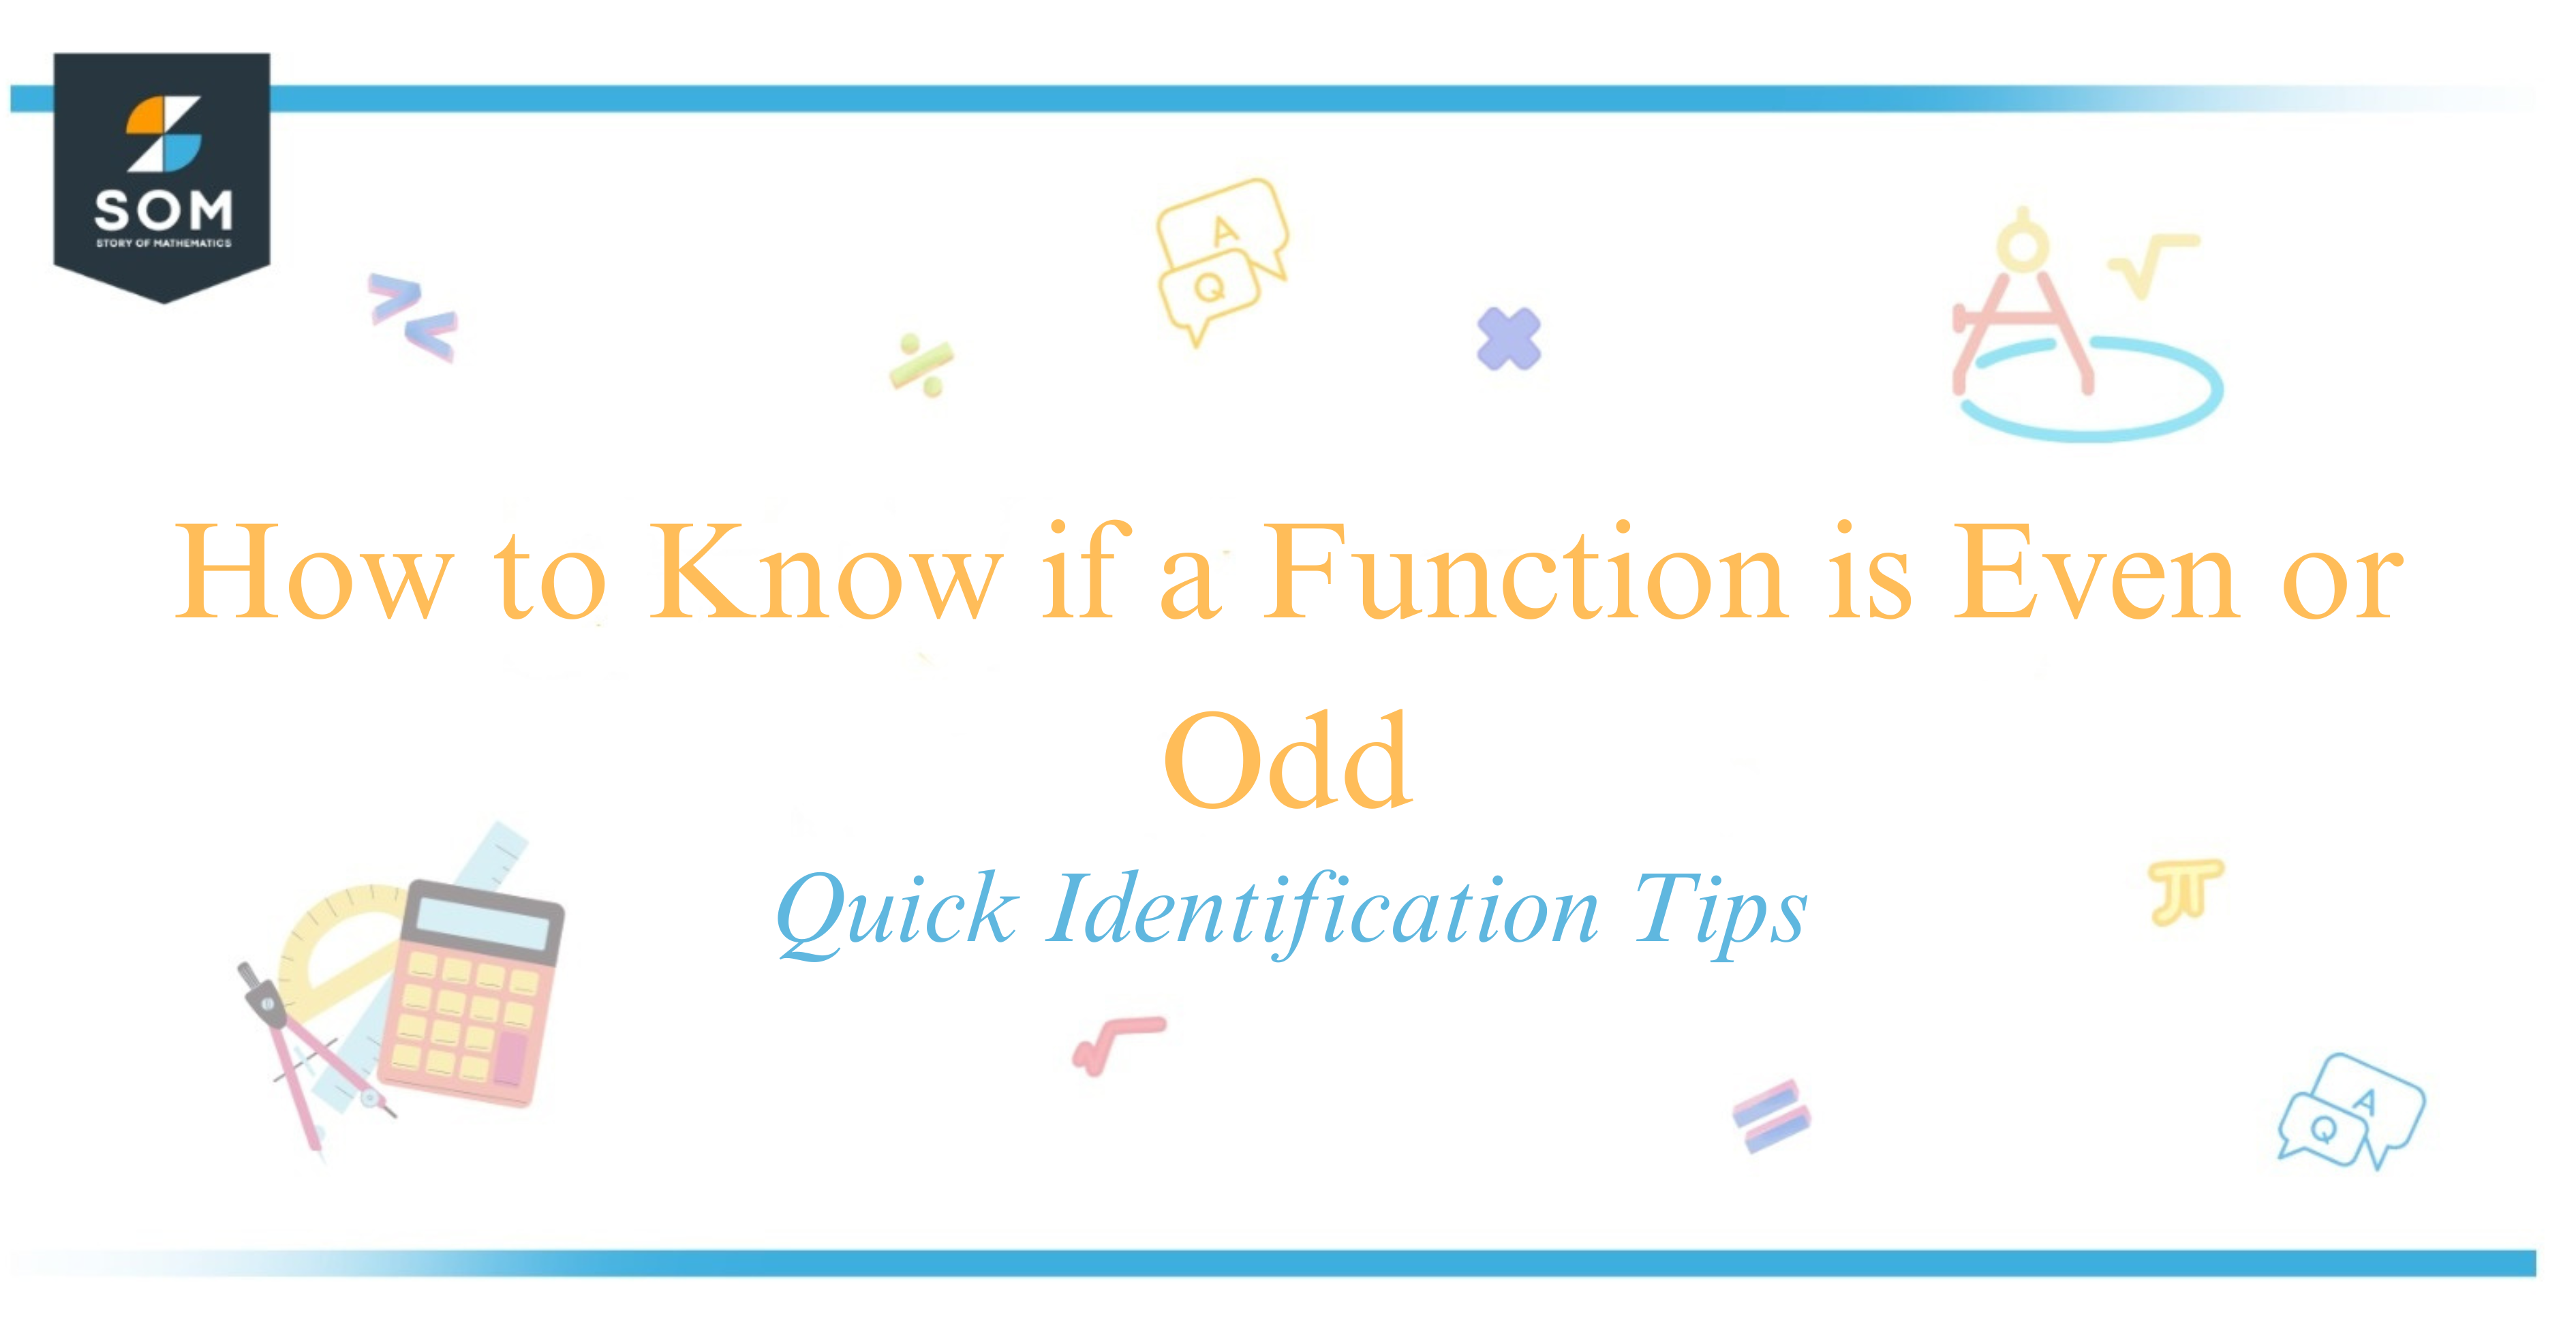 How to Know if a Function is Even or Odd Quick Identification Tips